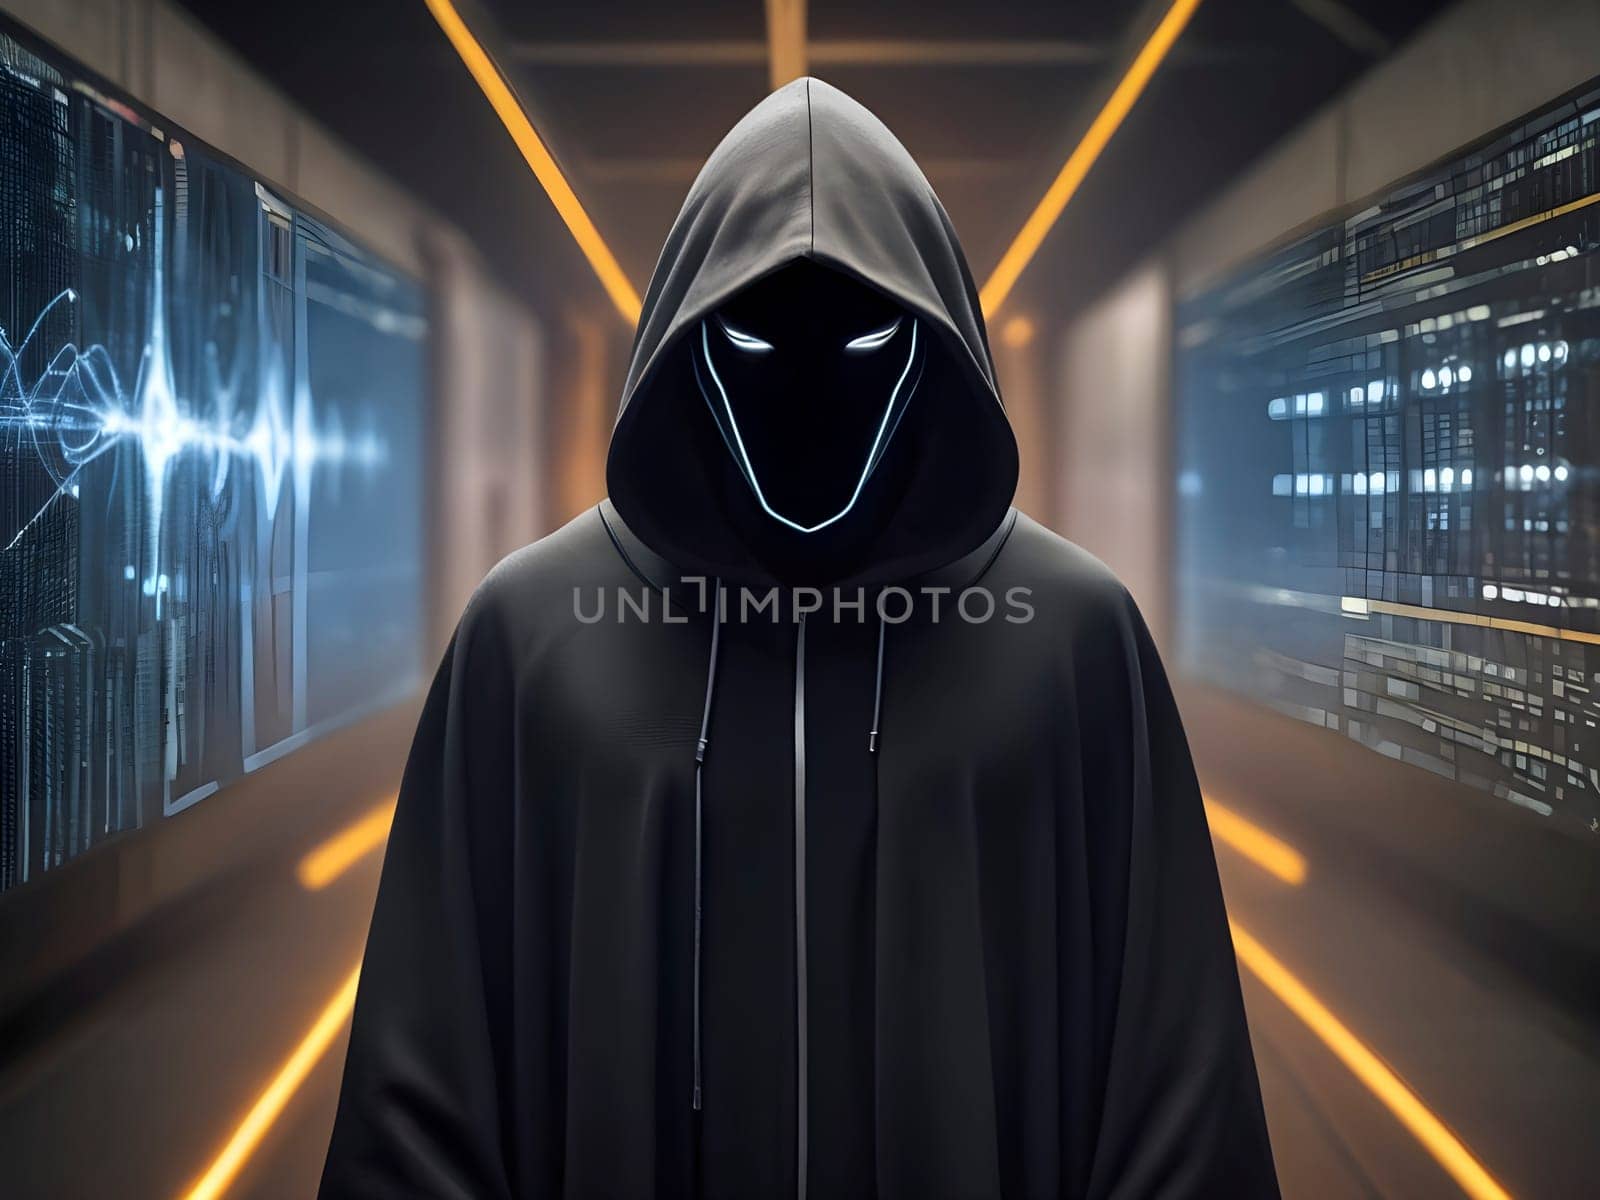 Hooded Watchman. Symbolizing Cyber Vigilance in the Digital Age.